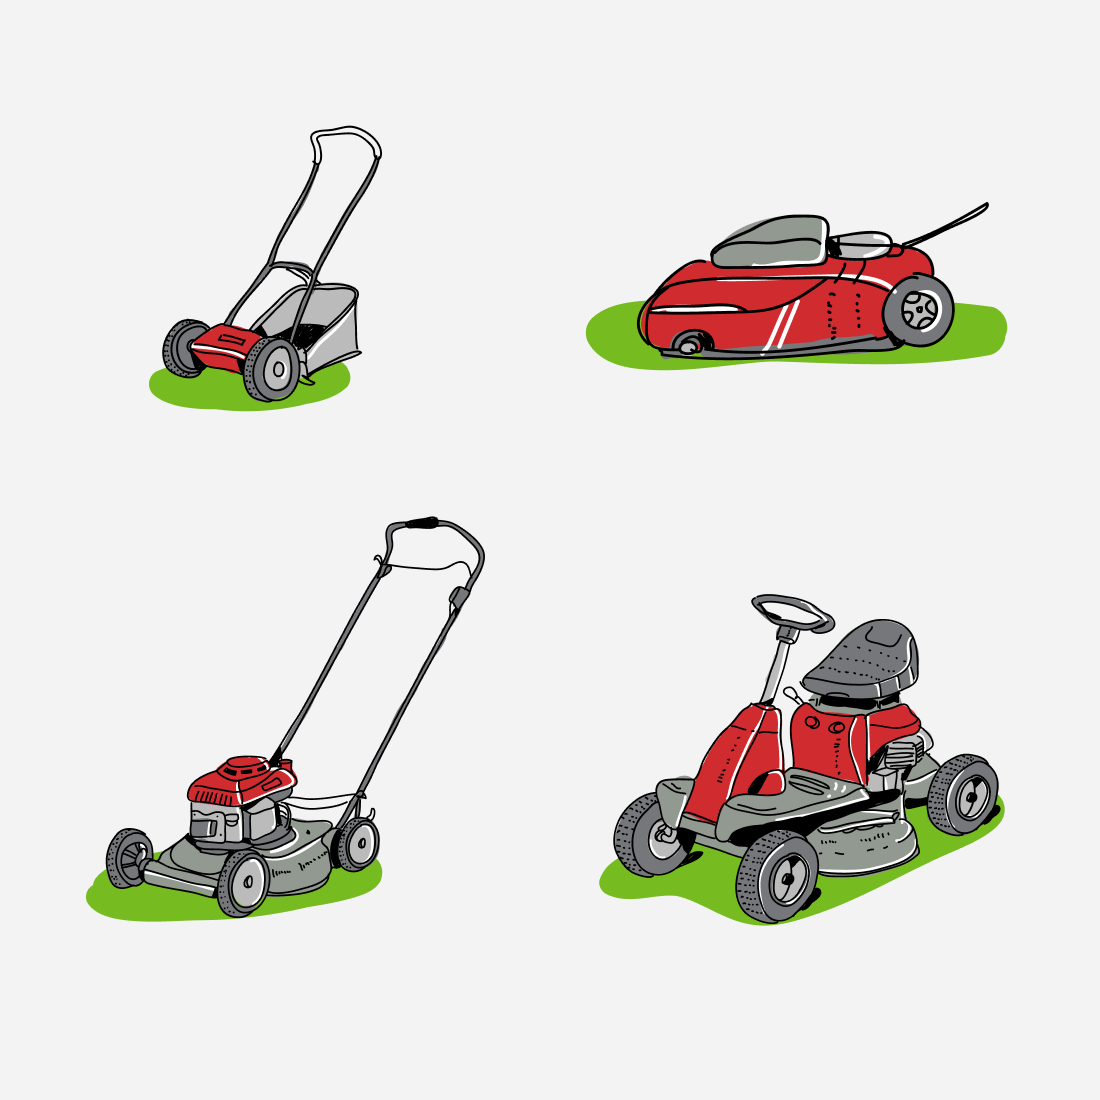 Robot mower, rider and petrol lawnmower pictured on the lawn.